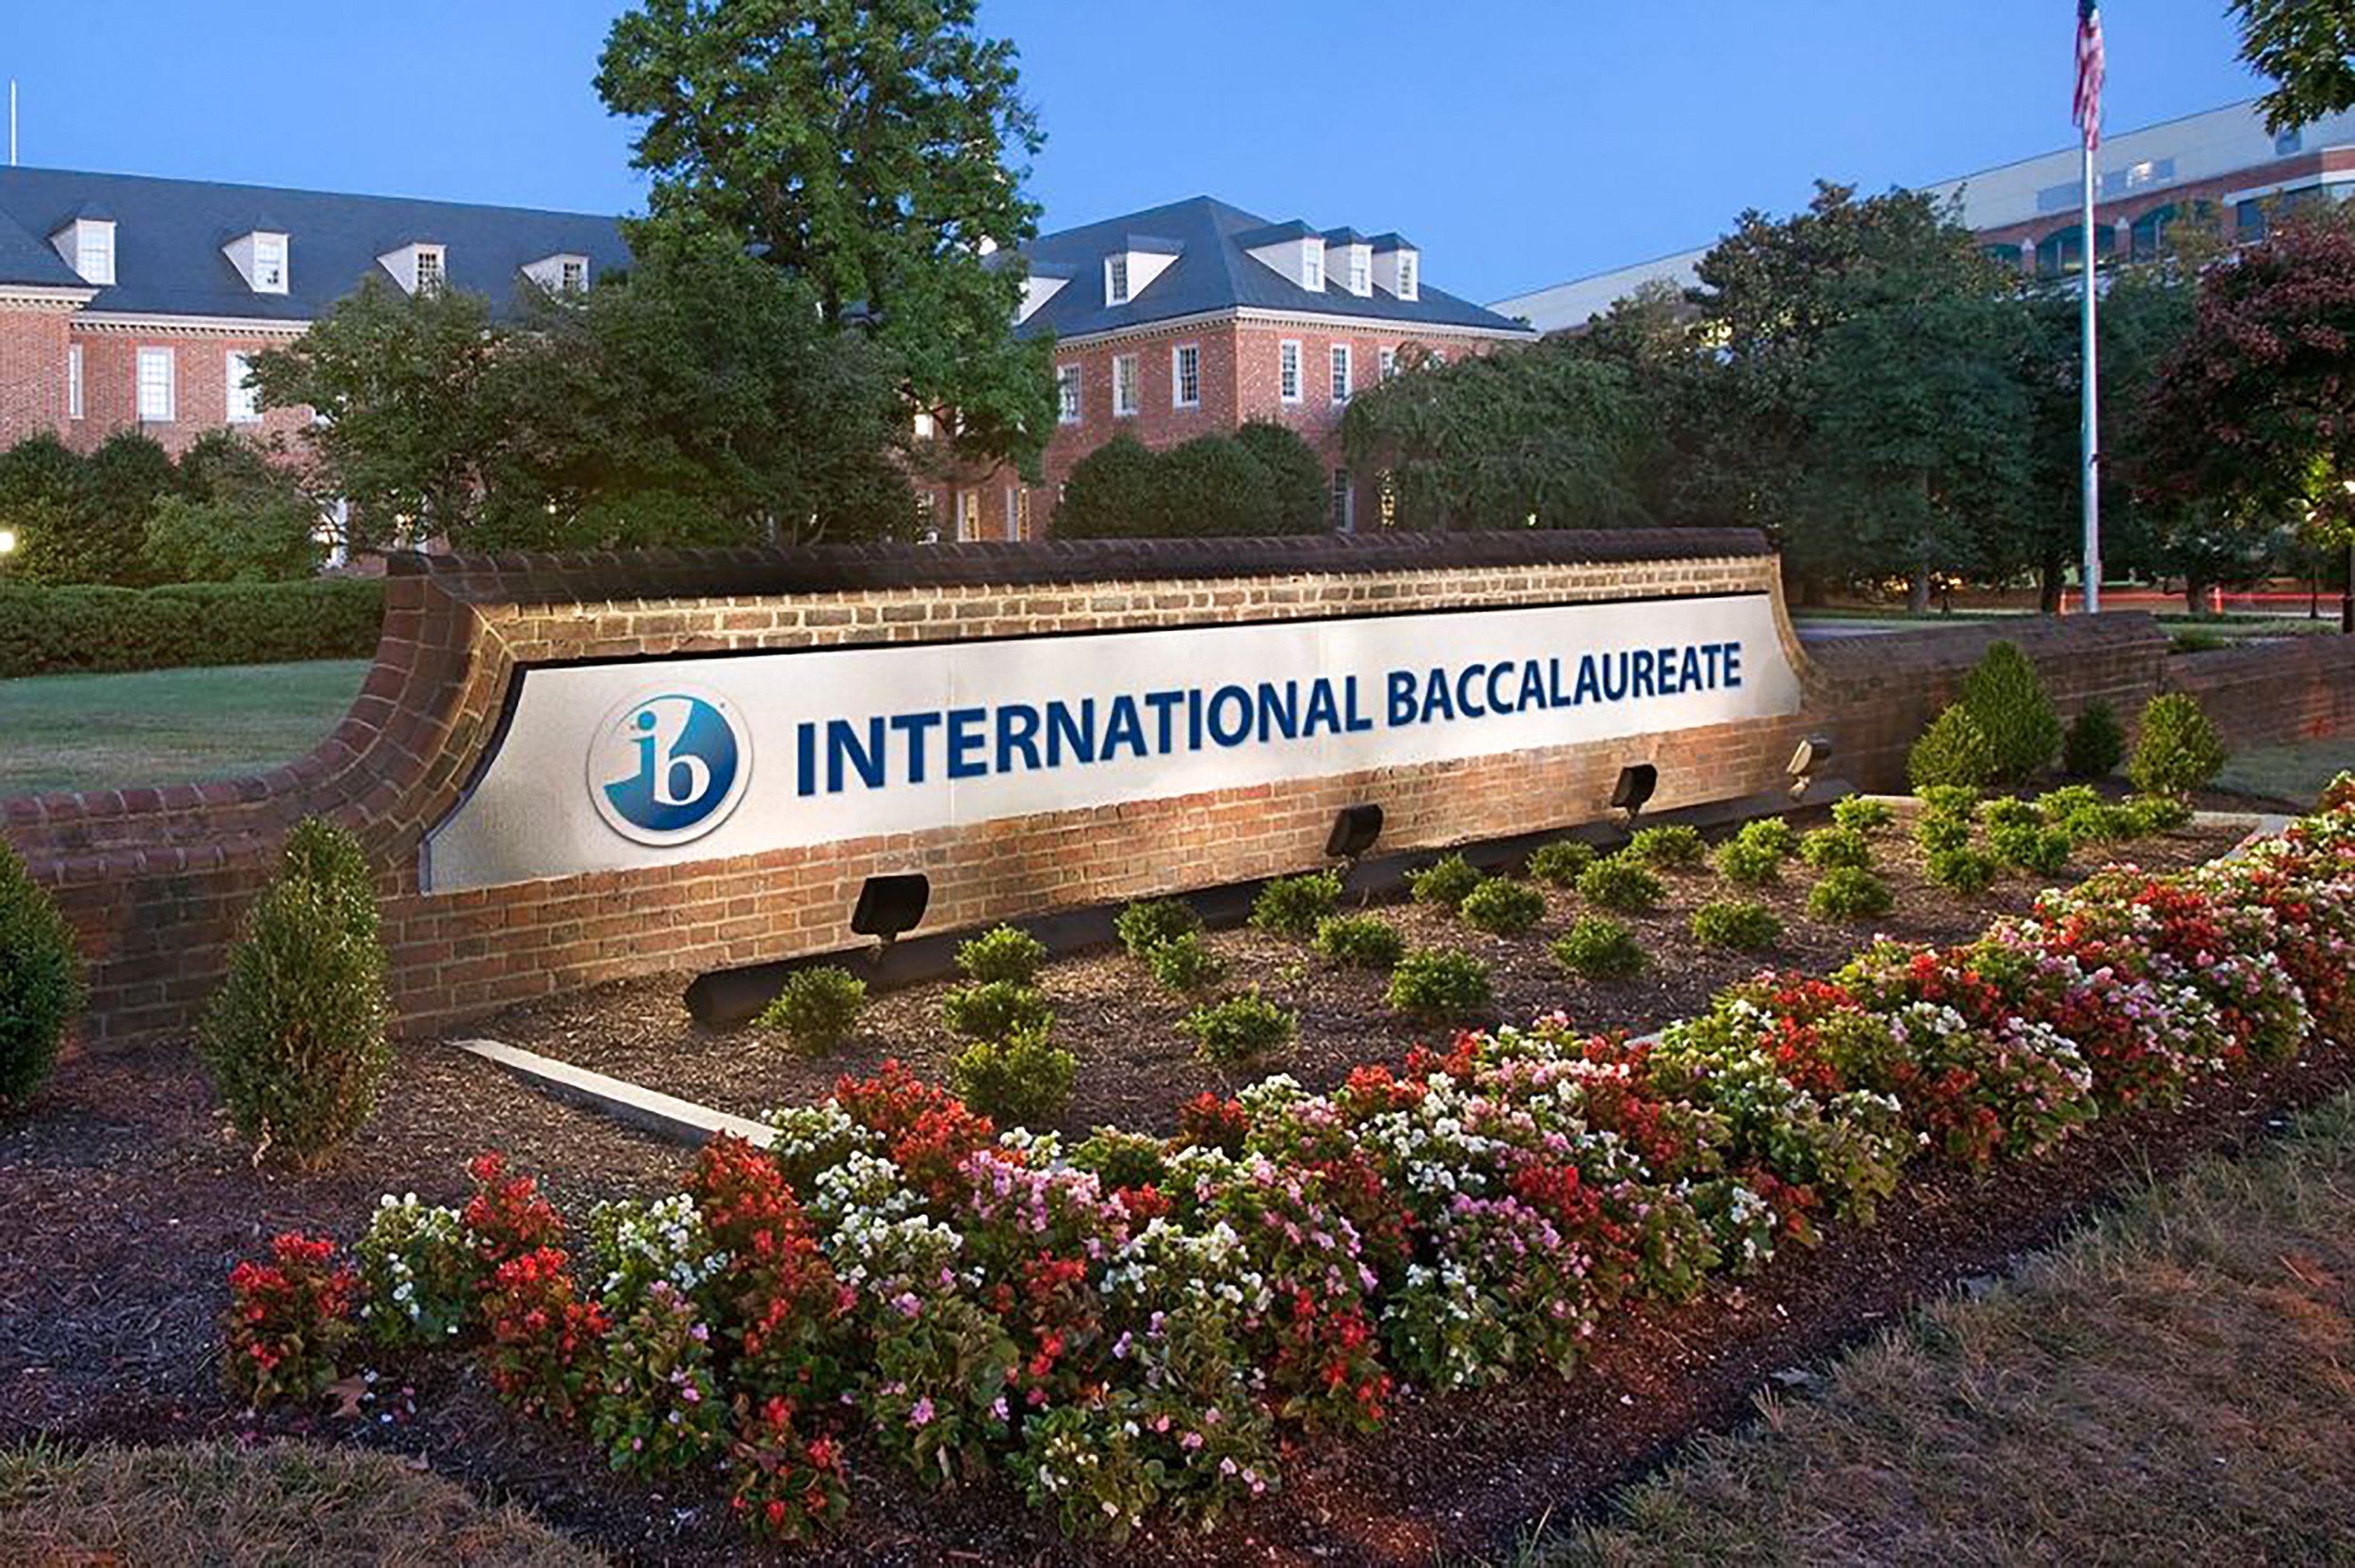 The International Baccalaureate exams body will probe leaks after finding evidence of cheating. Photo: Handout